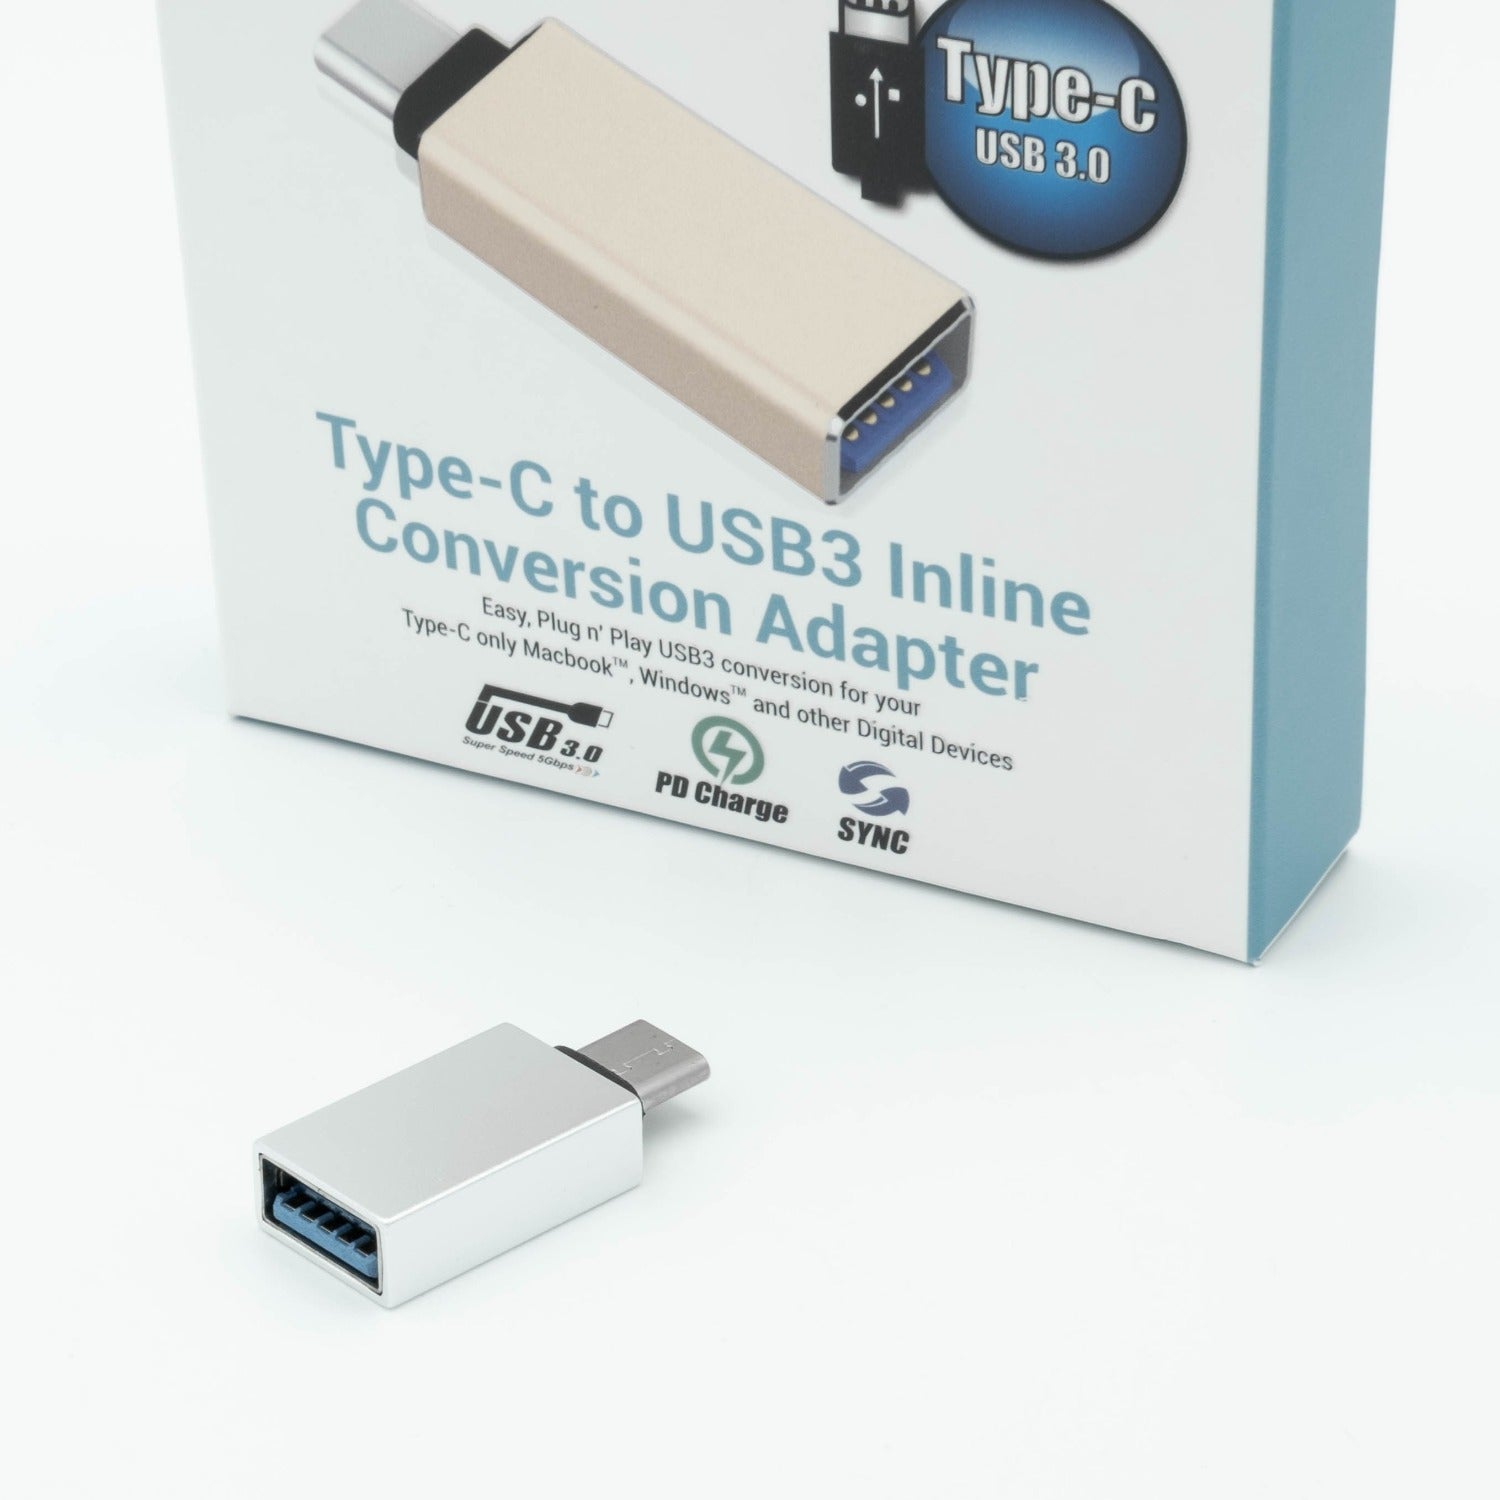 USB3.0 Type-C to USB Adapter - Usb Type C to Usb 3.0 Adapter